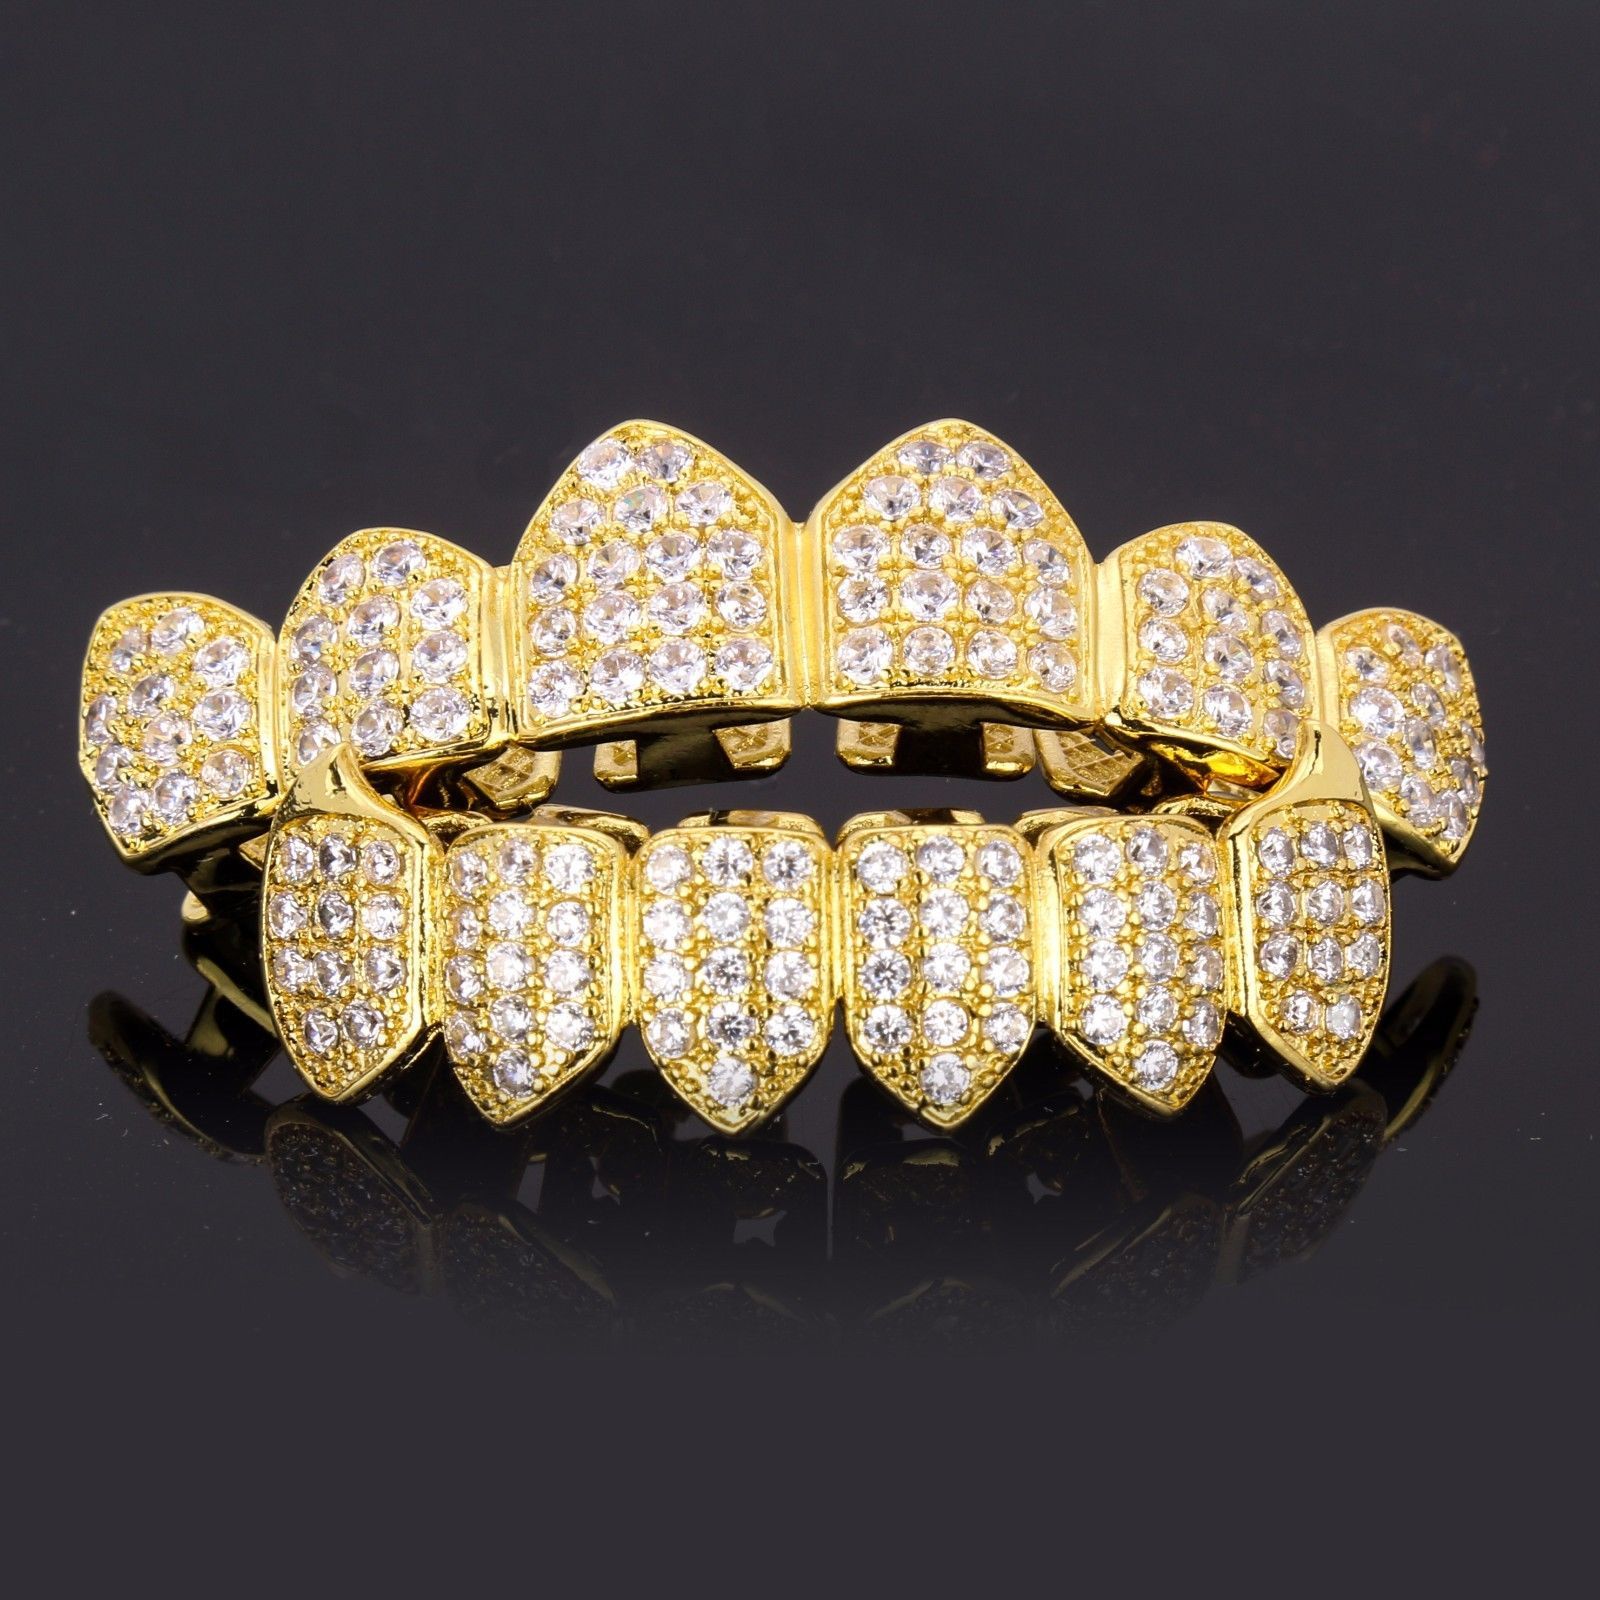 18k Gold Plated High Quality Cz Plain Top And Bottom Fang Grillz Mouth Teeth Grillz Dental Grills